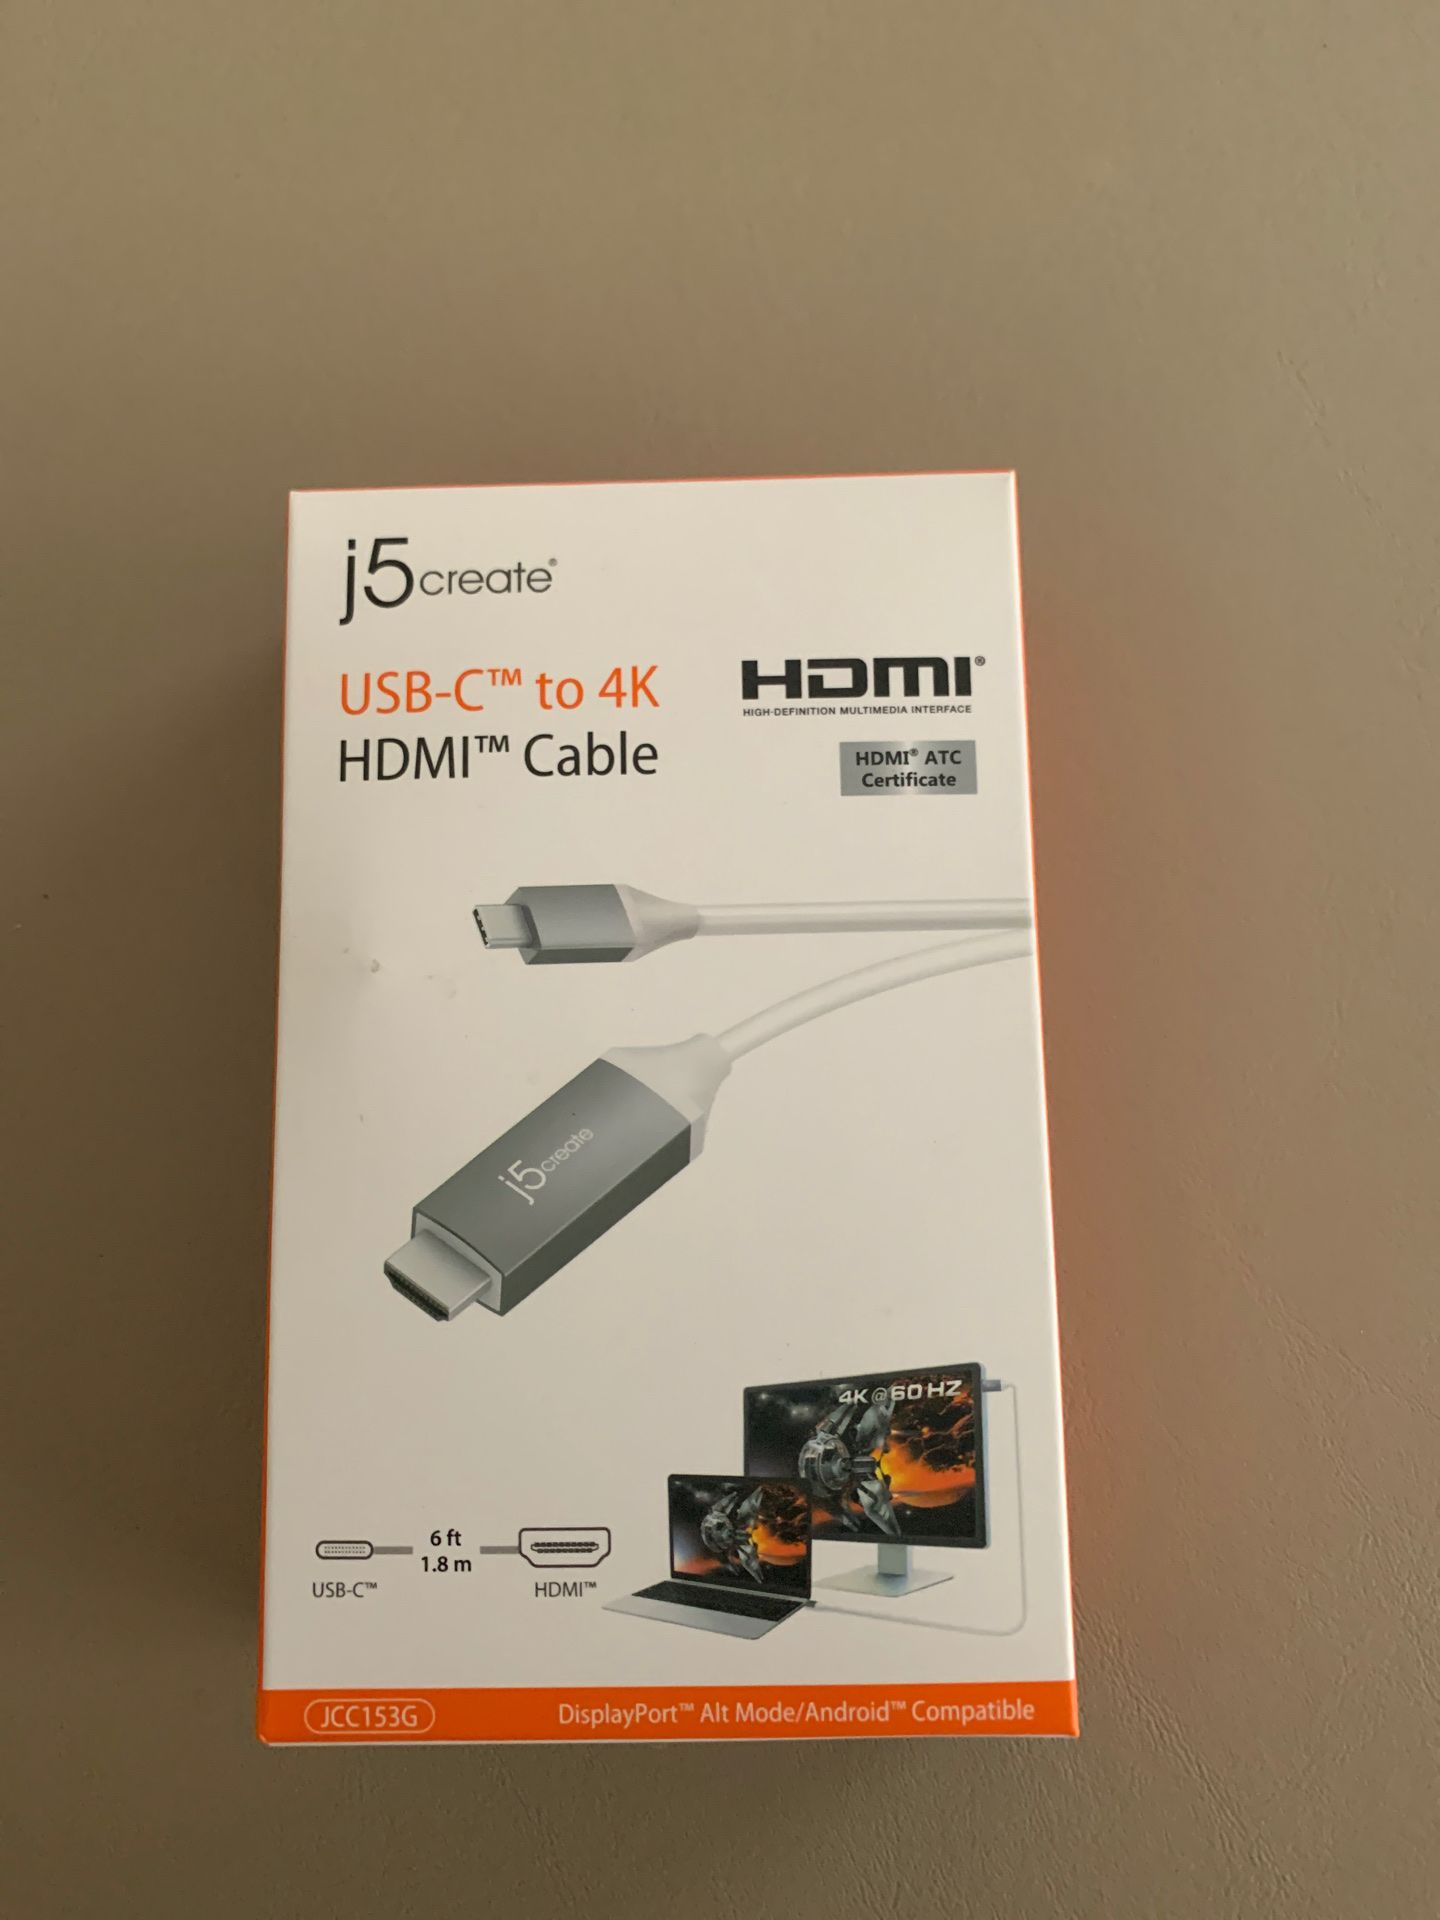 USB-C to 4K HDMI cable